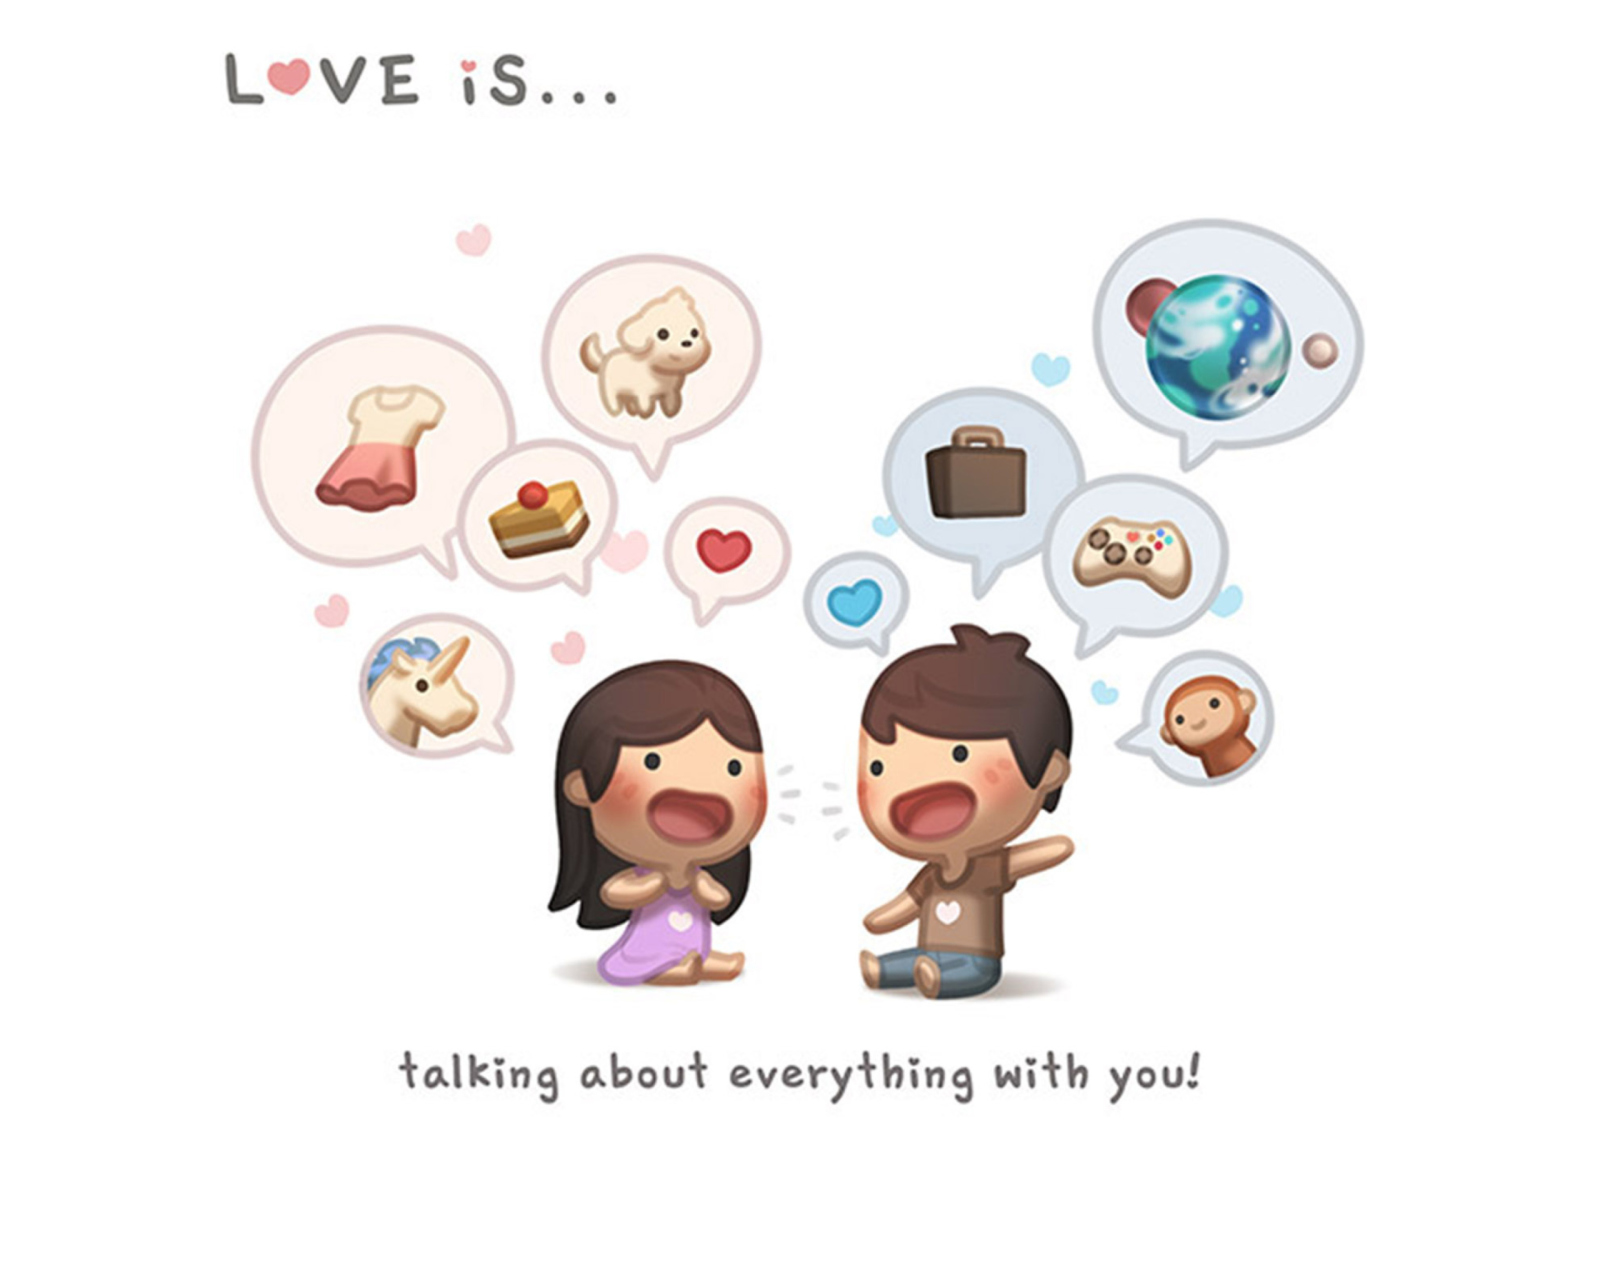 Das Love Is - Talking About Everything With You Wallpaper 1600x1280